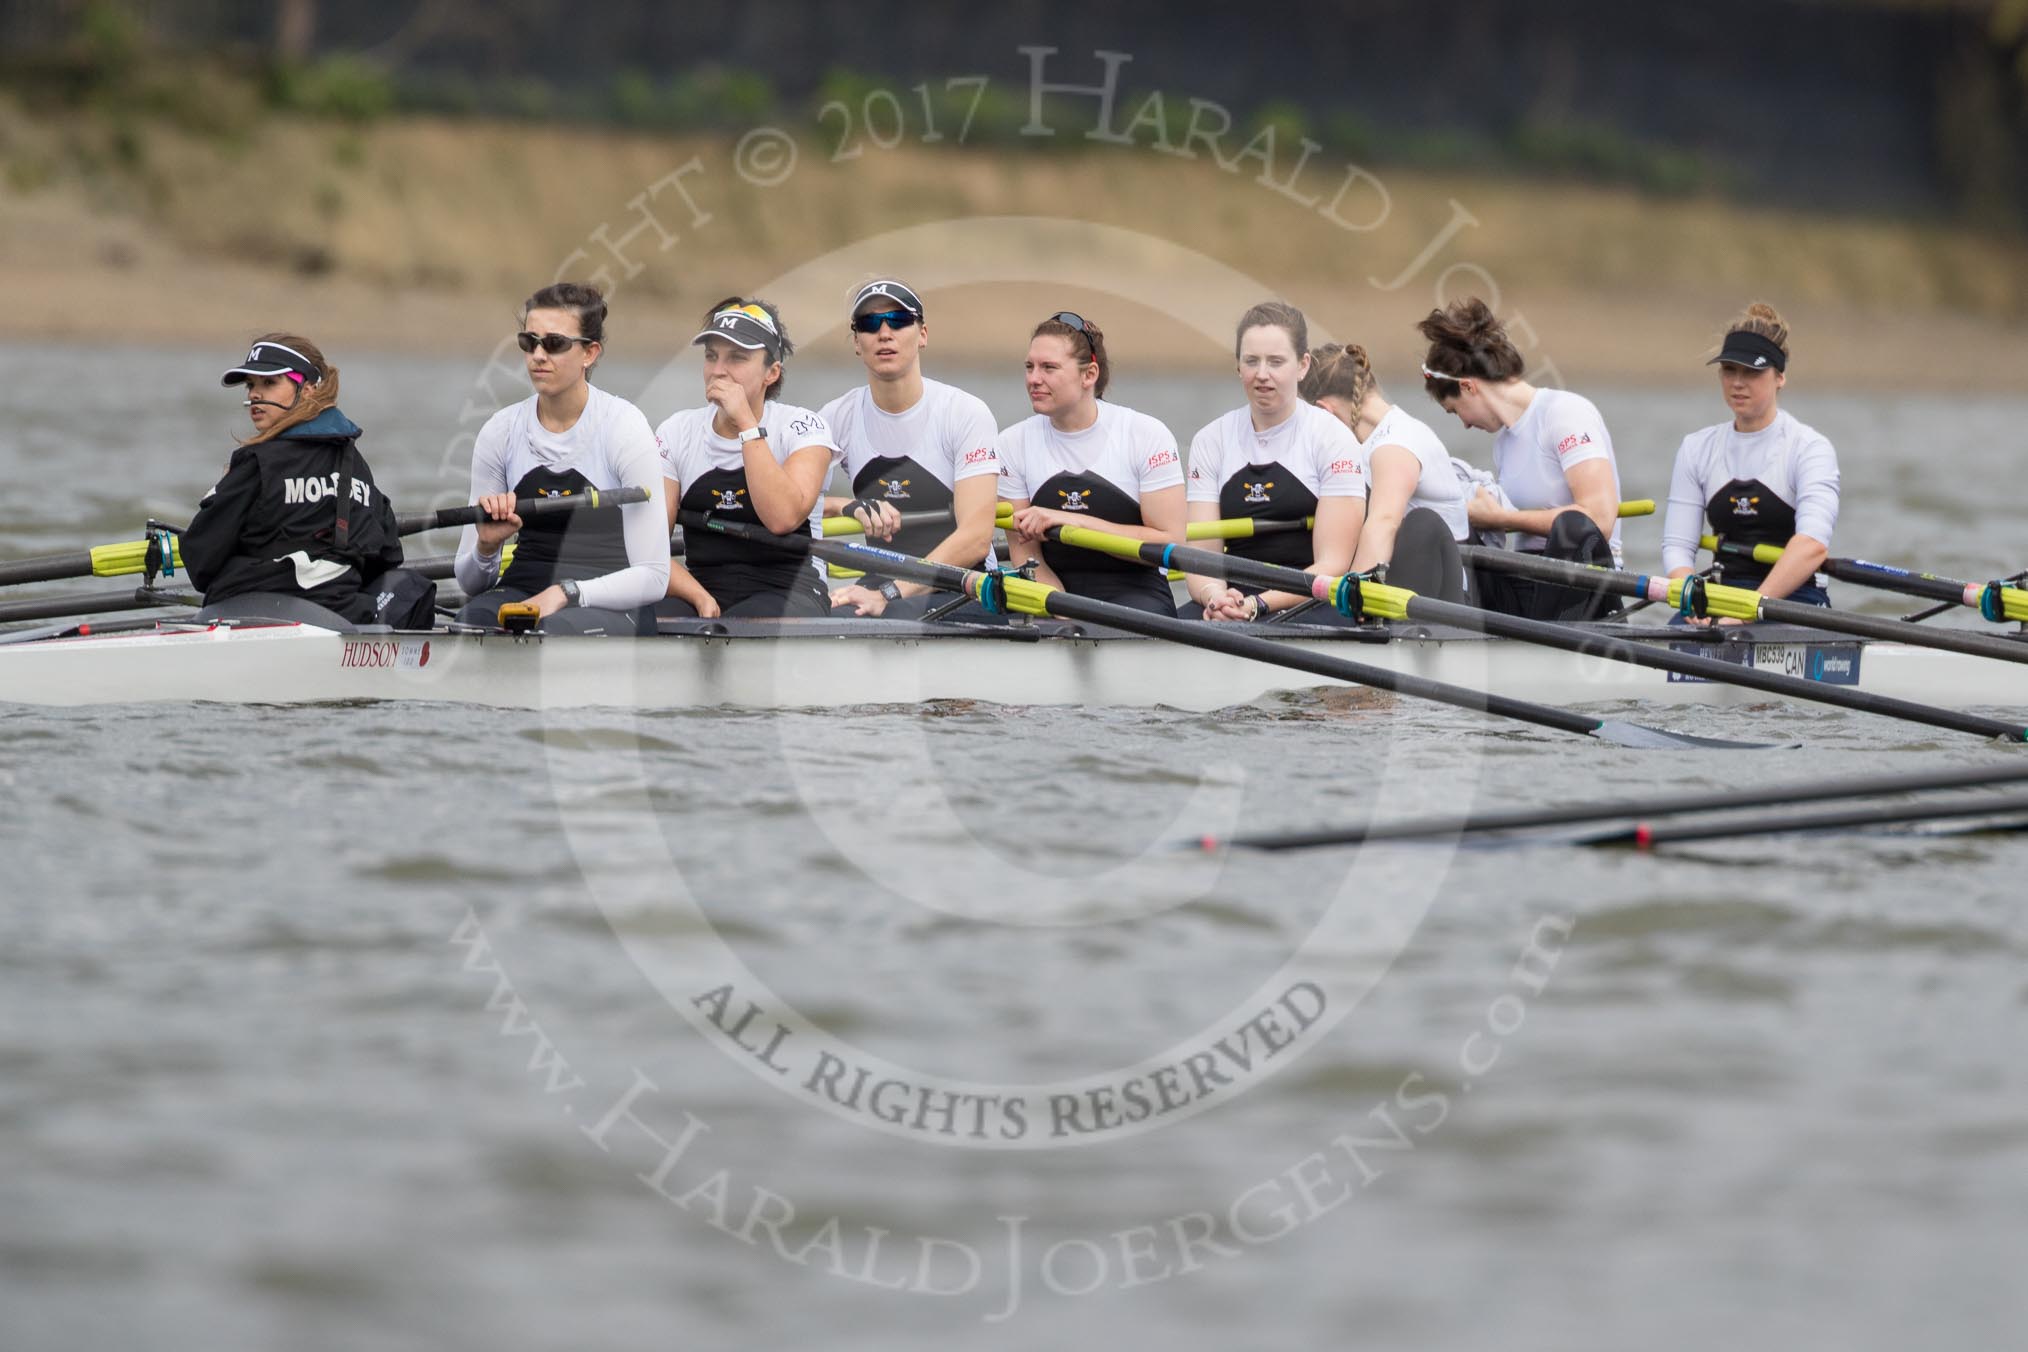 The Cancer Research UK Boat Race season 2017 - Women's Boat Race Fixture OUWBC vs Molesey BC: The Molesey boat - cox Anna Corderoy, S Ruth Whyman, 7 Gabriella Rodriguez, 6 Elo Luik, 5 Katie Bartlett, 4 Claire McKeown, 3 Lucy Primmer, 2 Caitlin Boyland, B Emma McDonald.
River Thames between Putney Bridge and Mortlake,
London SW15,

United Kingdom,
on 19 March 2017 at 15:53, image #37